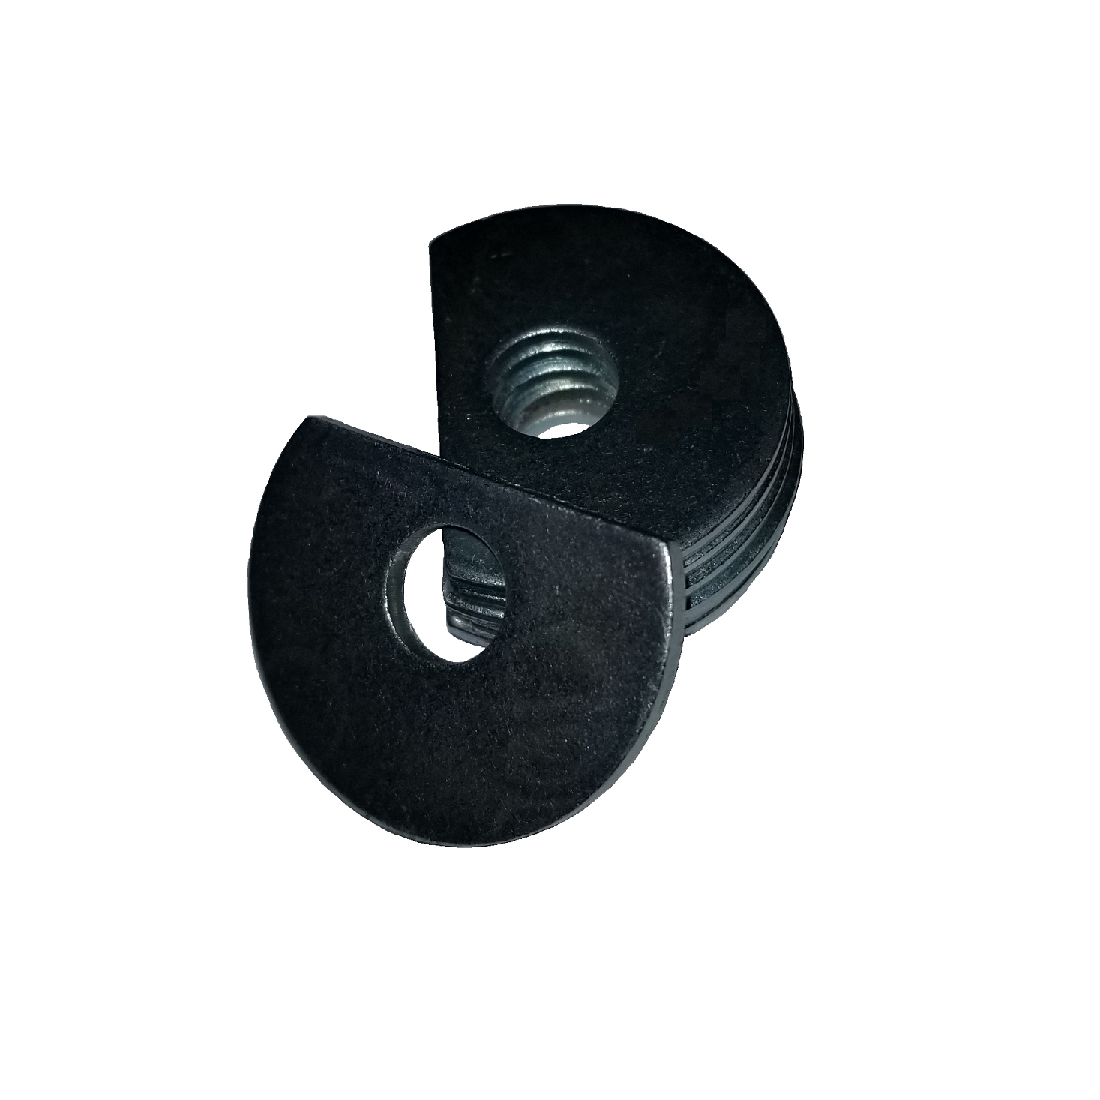 Clipped OD Washer - 0.687 ID, 1.250 OD, 0.125 Thick, Low Carbon Steel - Soft